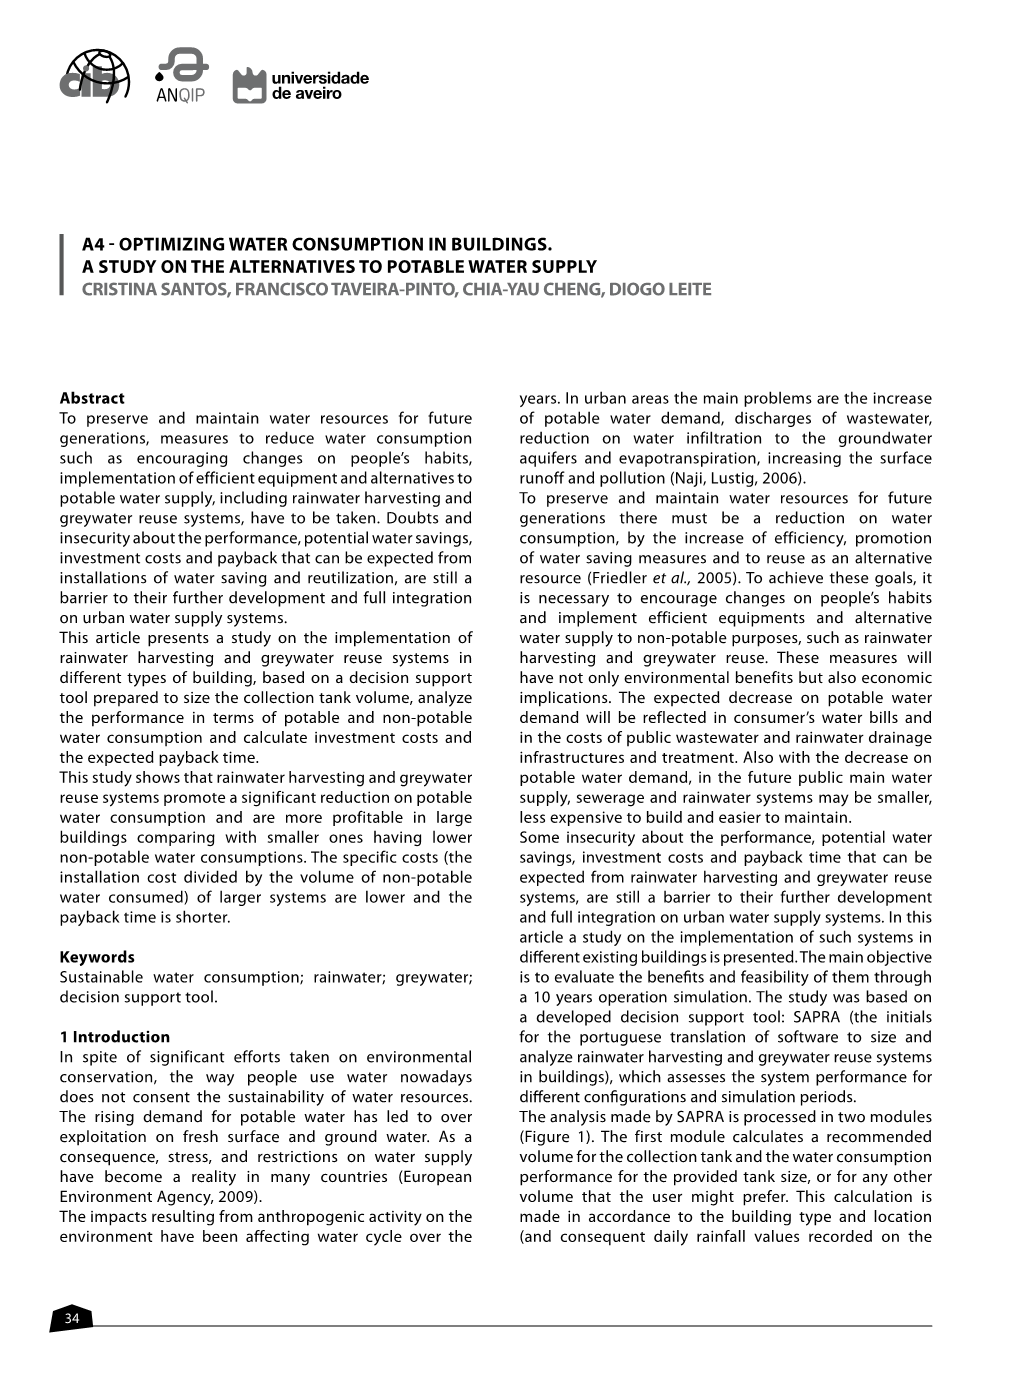 Optimizing Water Consumption in Buildings. a Study on the Alternatives to Potable Water Supply CRISTINA SANTOS, FRANCISCO TAVEIRA-PINTO, CHIA-YAU CHENG, DIOGO LEITE